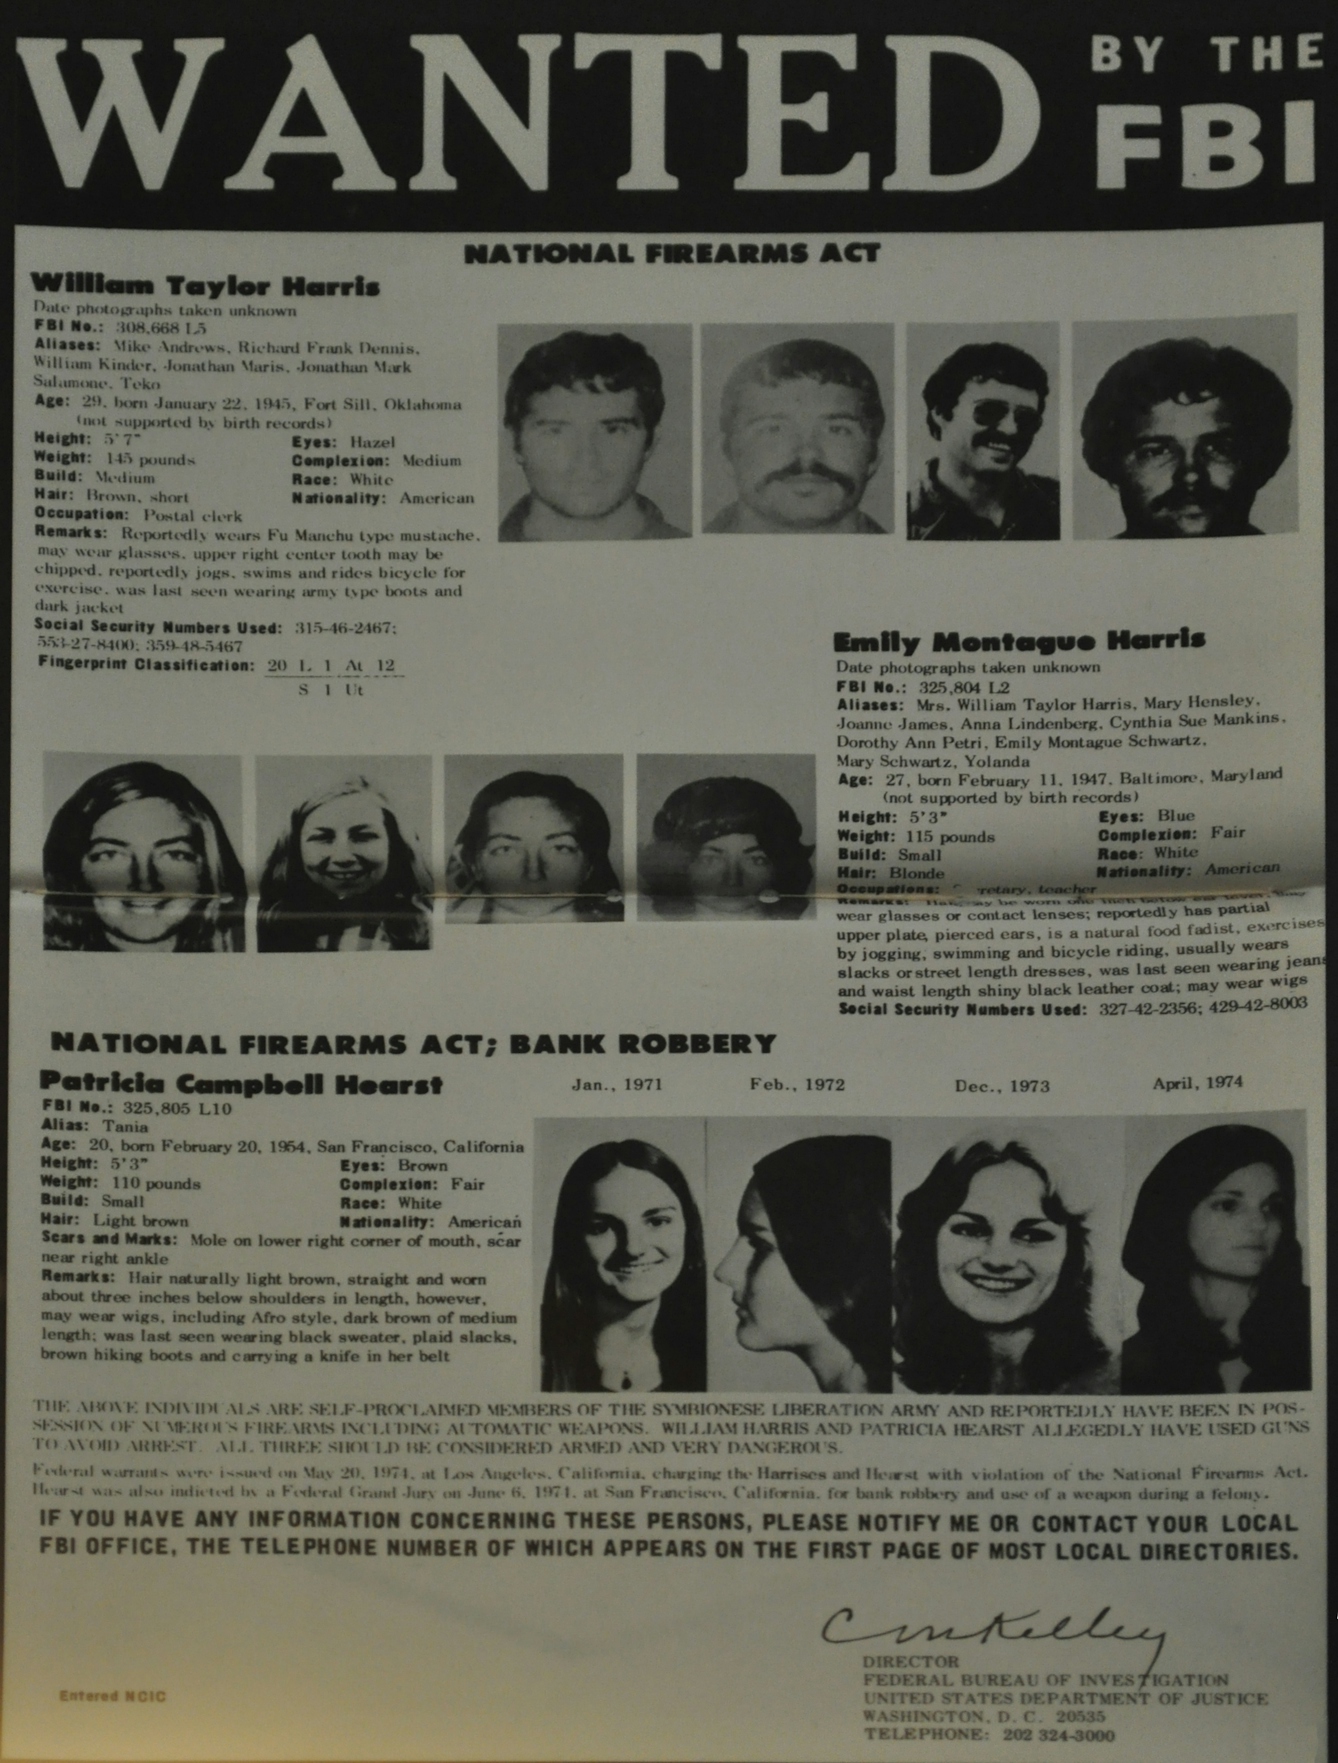 A wanted poster featuring various mugshots of suspects.